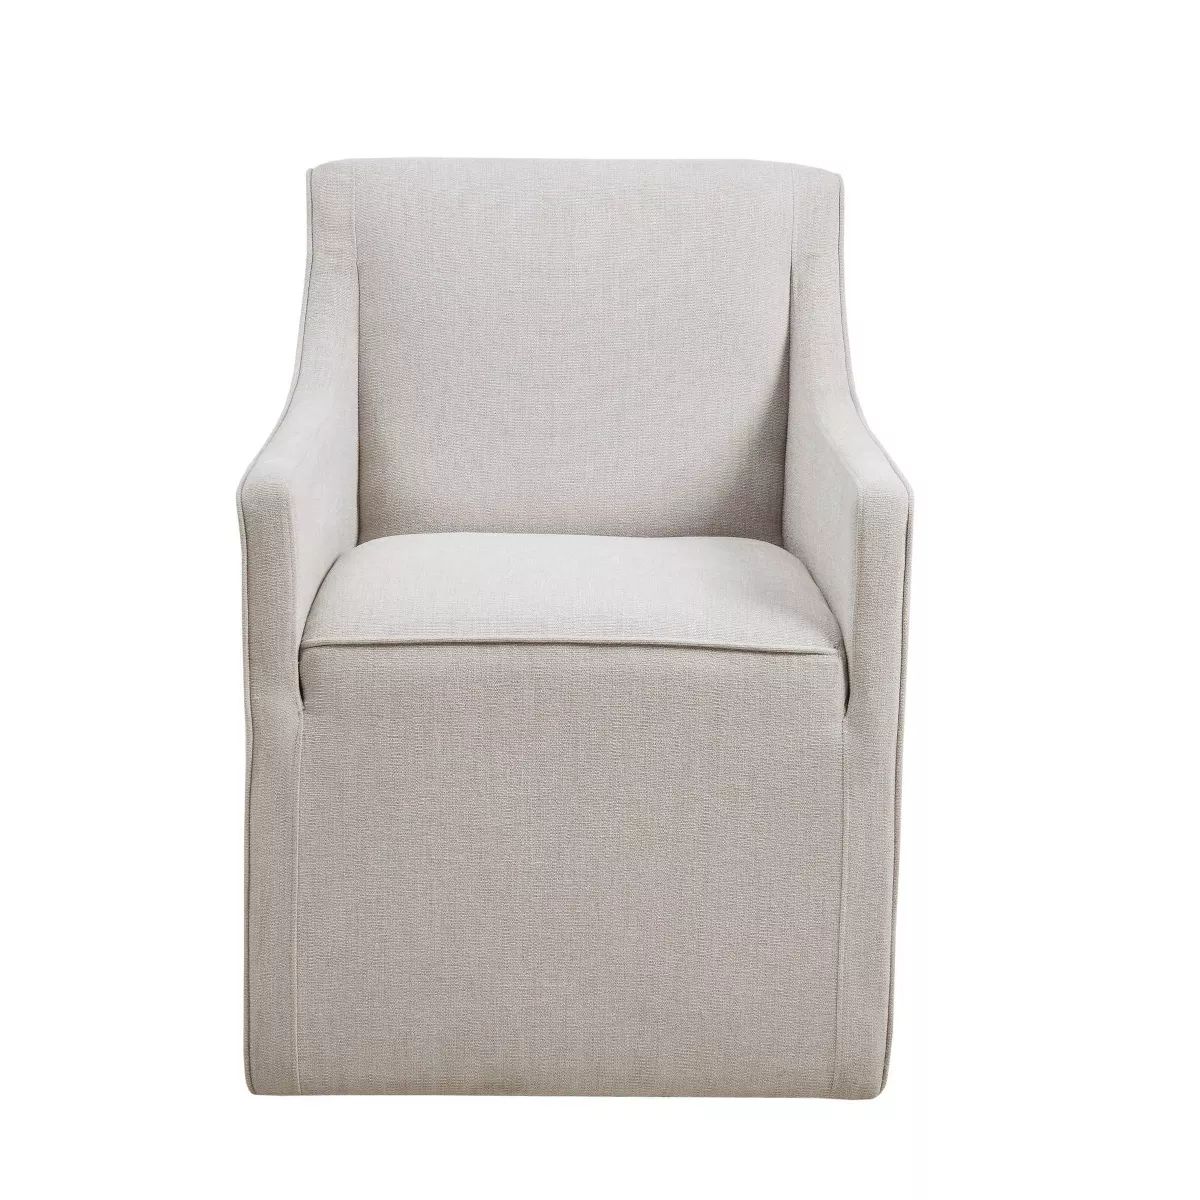 Hamilton Slipcover Dining Arm Chair with Casters Gray - Madison Park | Target